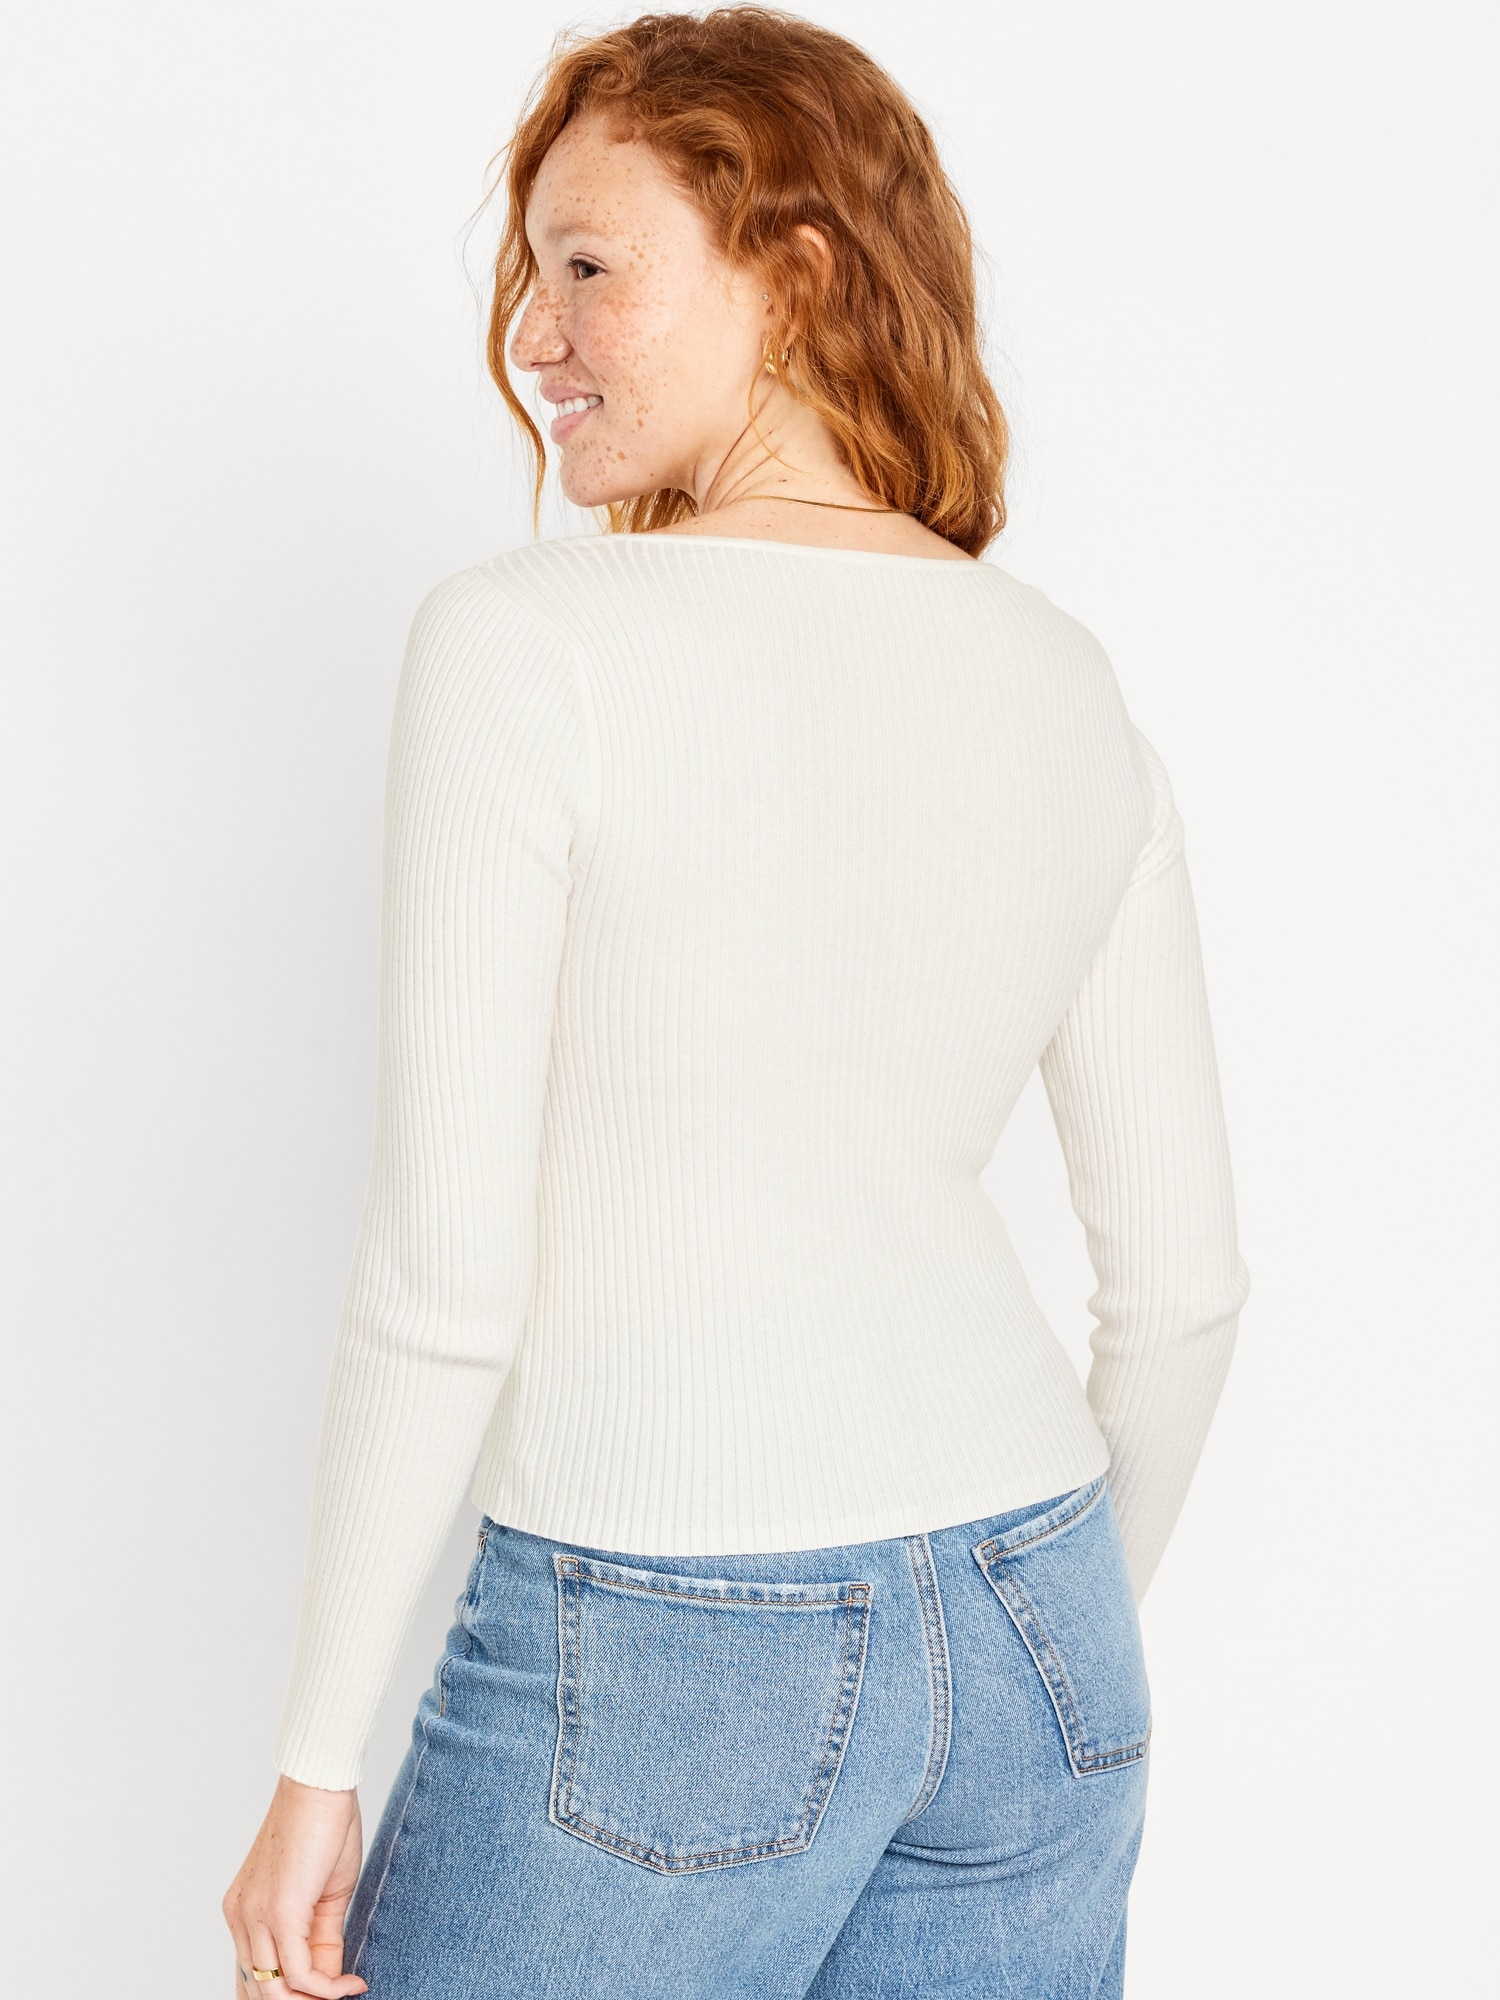 Fitted Rib-Knit Sweater for Women | Old Navy